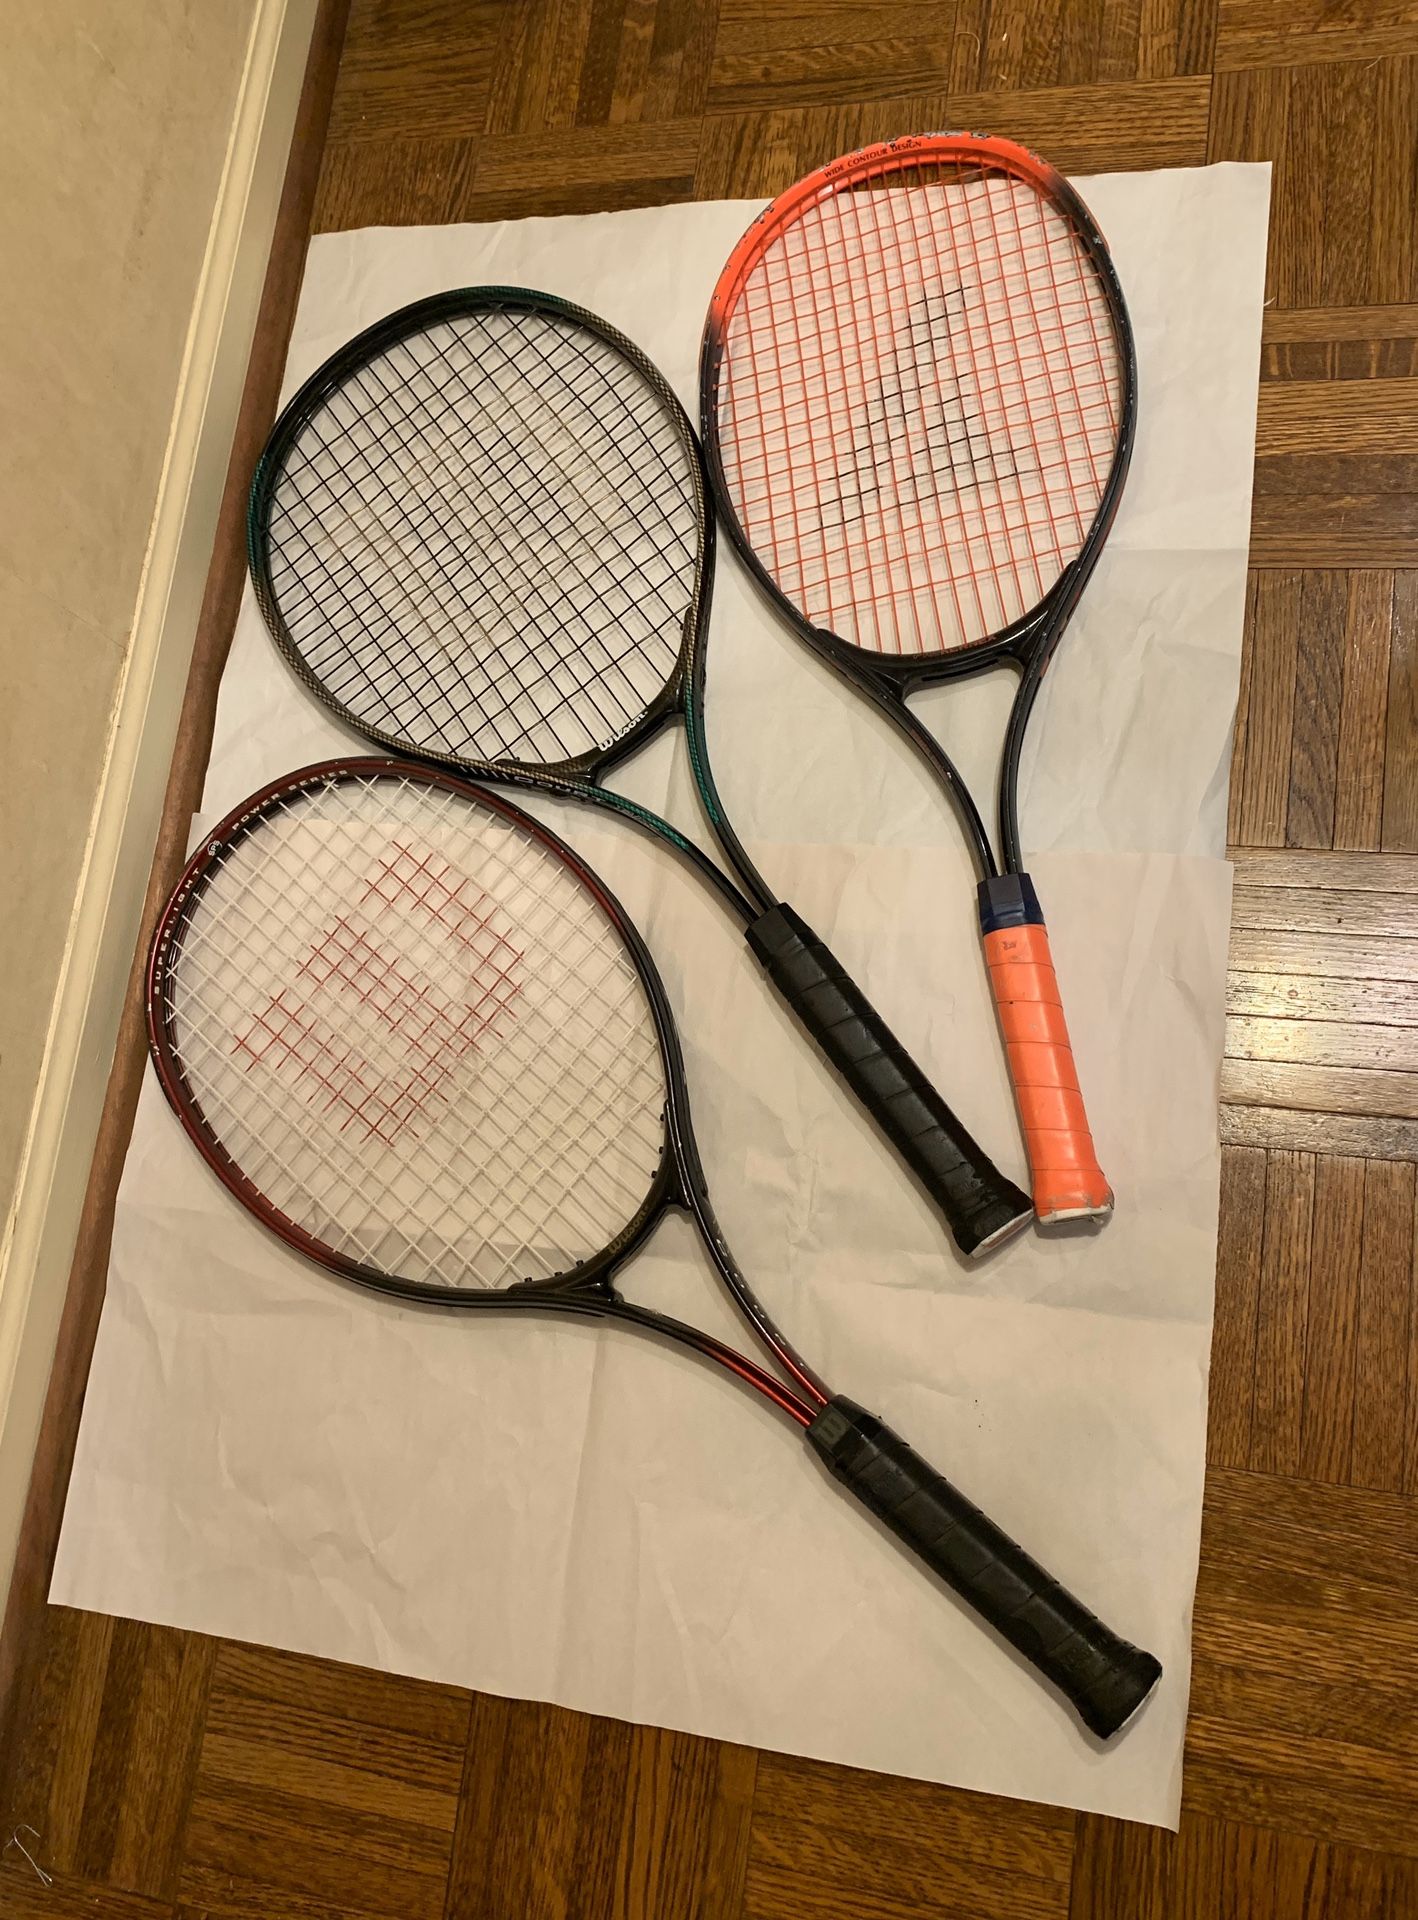 Tennis rackets (set of 3) and 2 covers